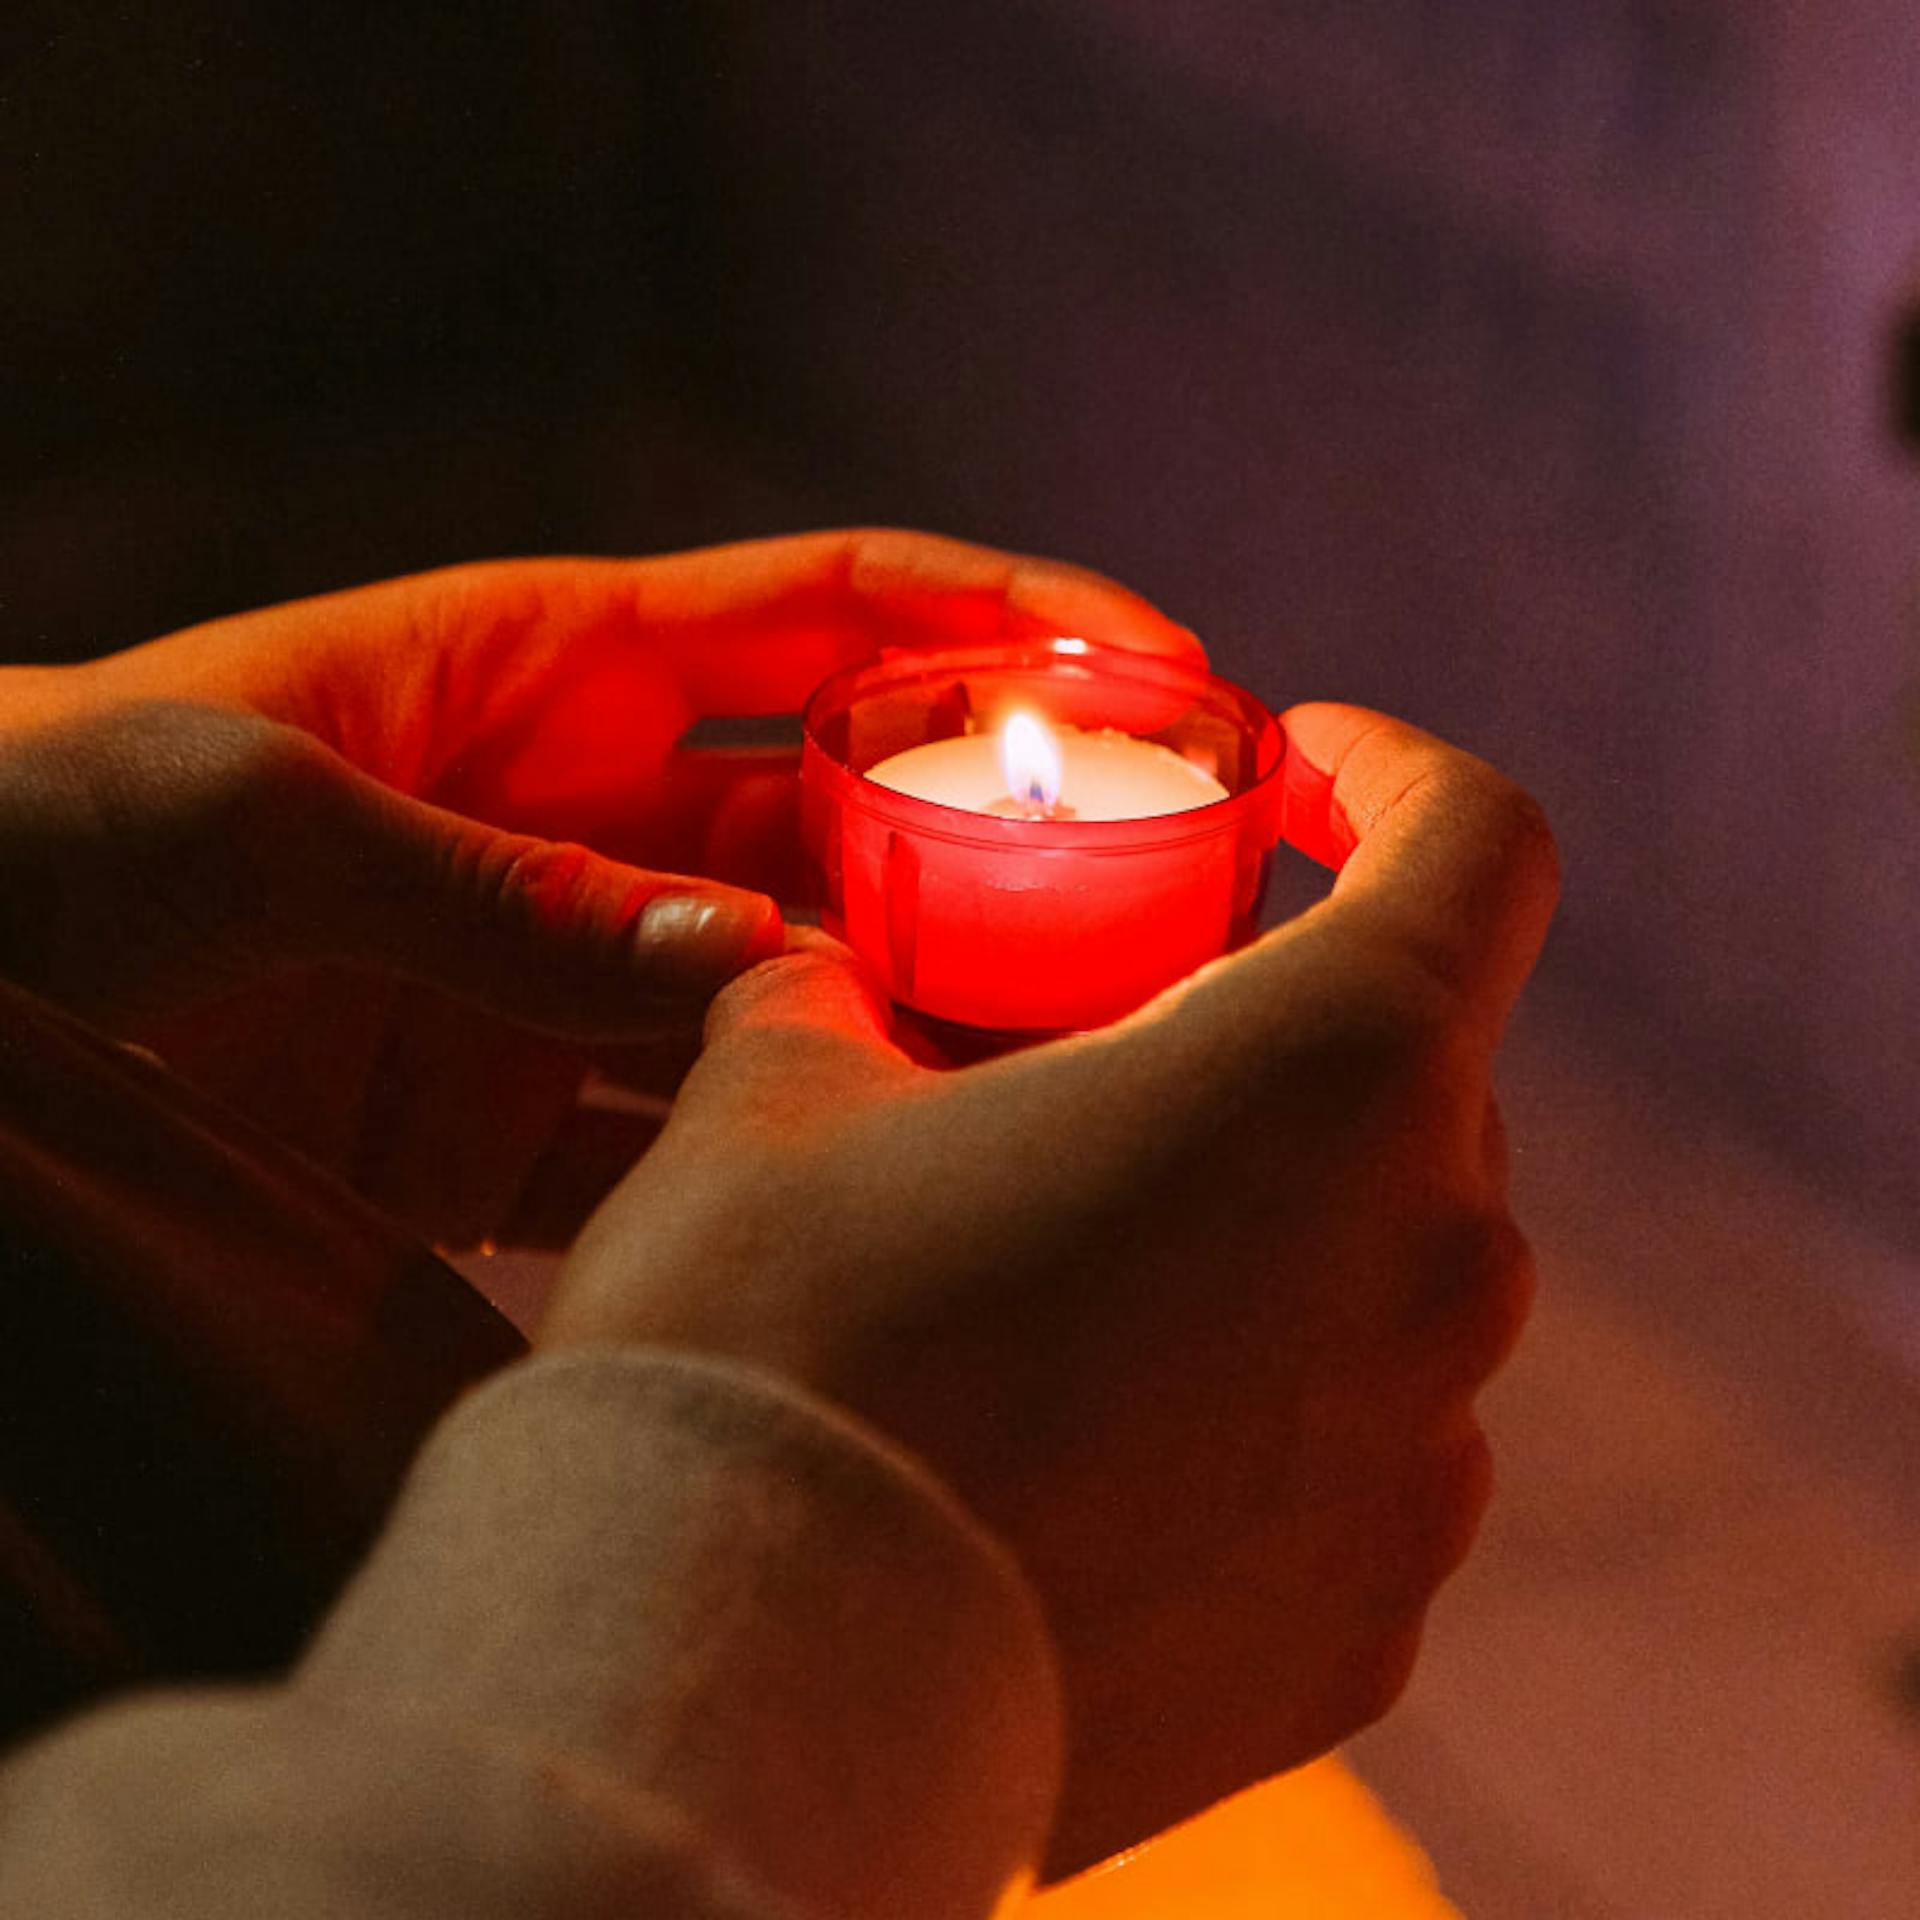 A woman lights a candle in prayer after being impregnated through rape.